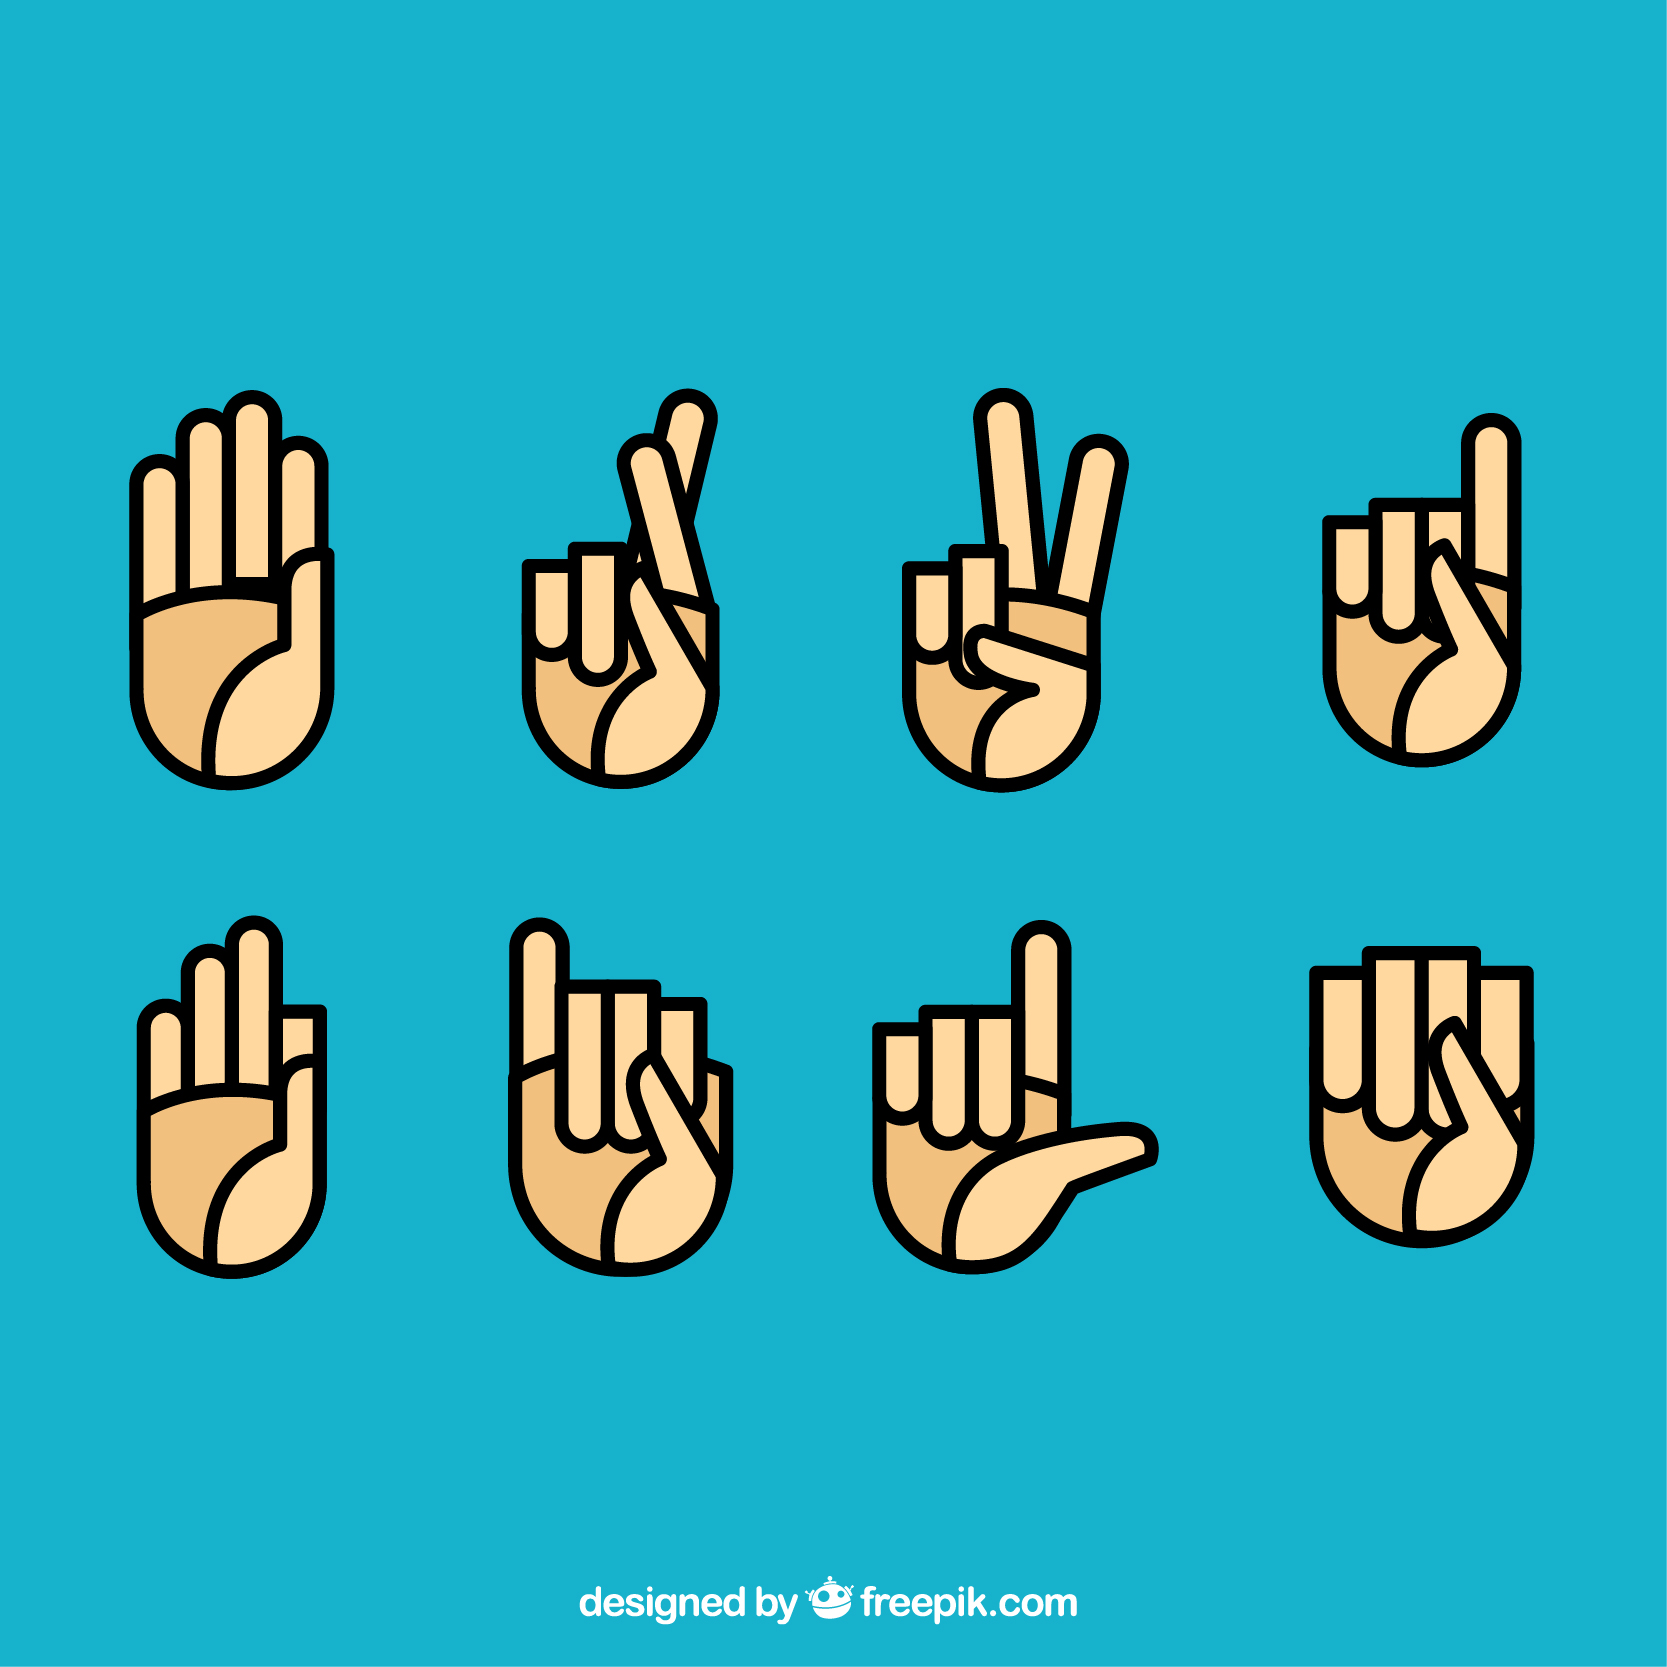 What do you know about sign languages?